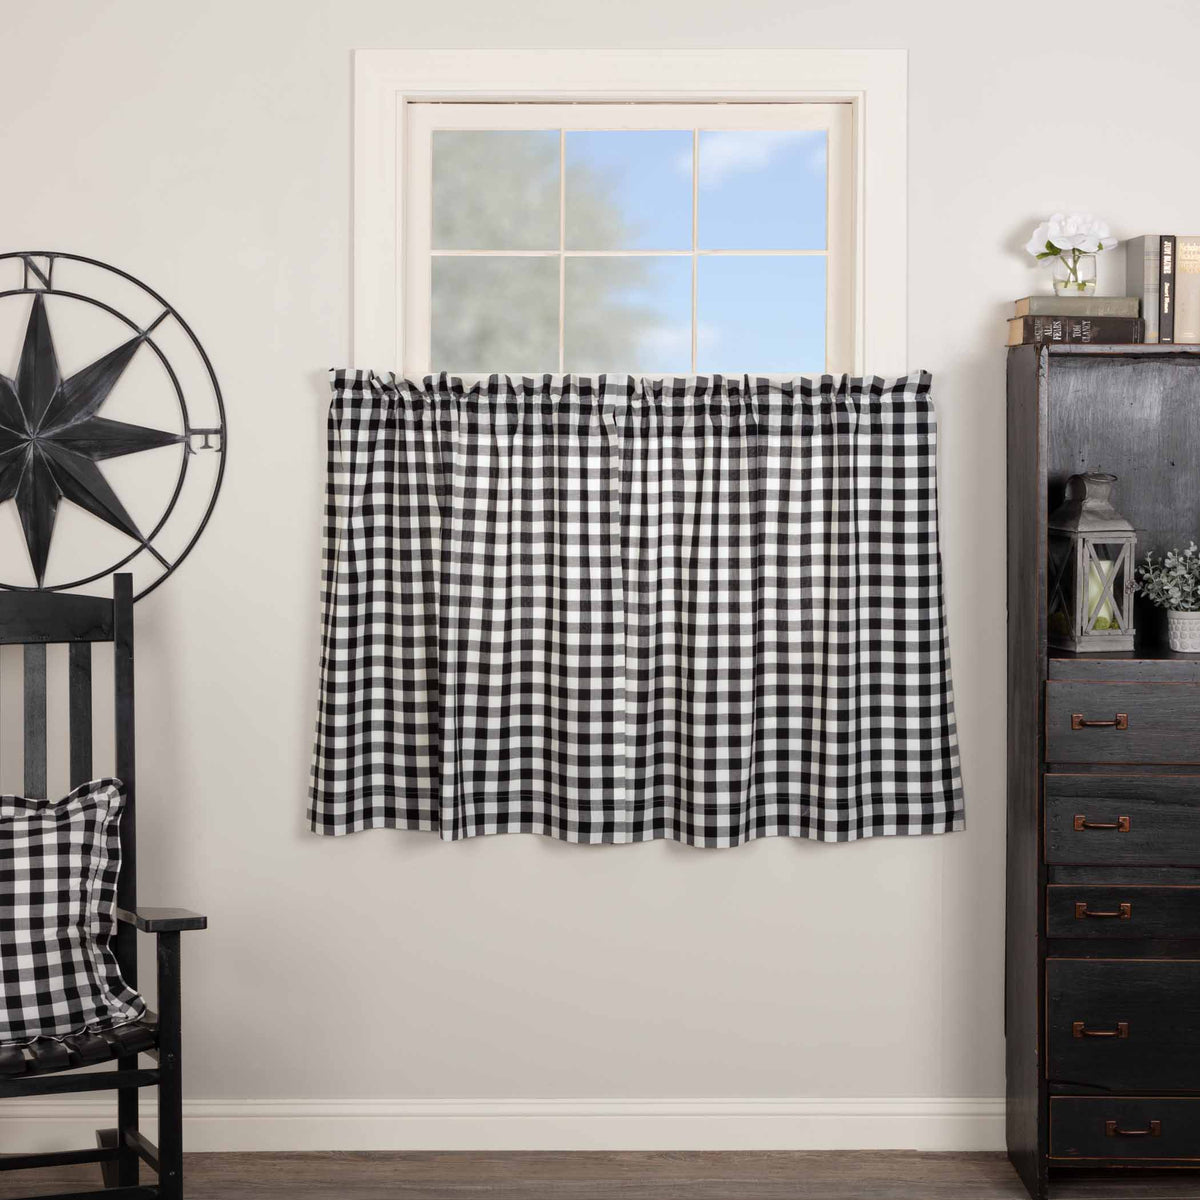 April & Olive Annie Buffalo Black Check Tier Set of 2 L36xW36 By VHC Brands